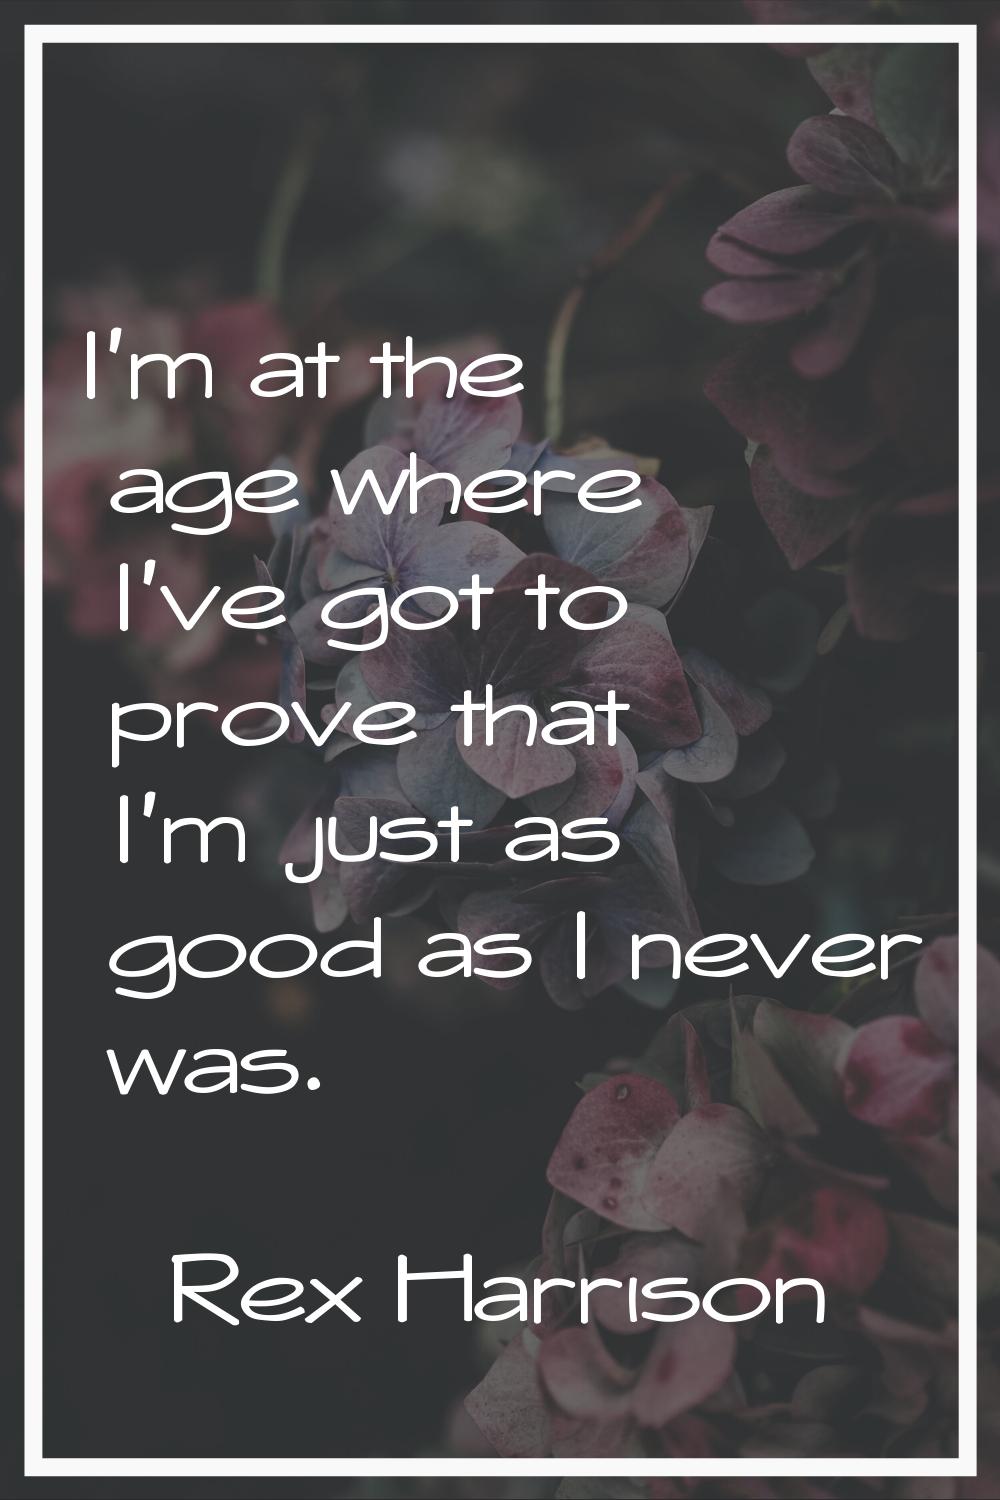 I'm at the age where I've got to prove that I'm just as good as I never was.